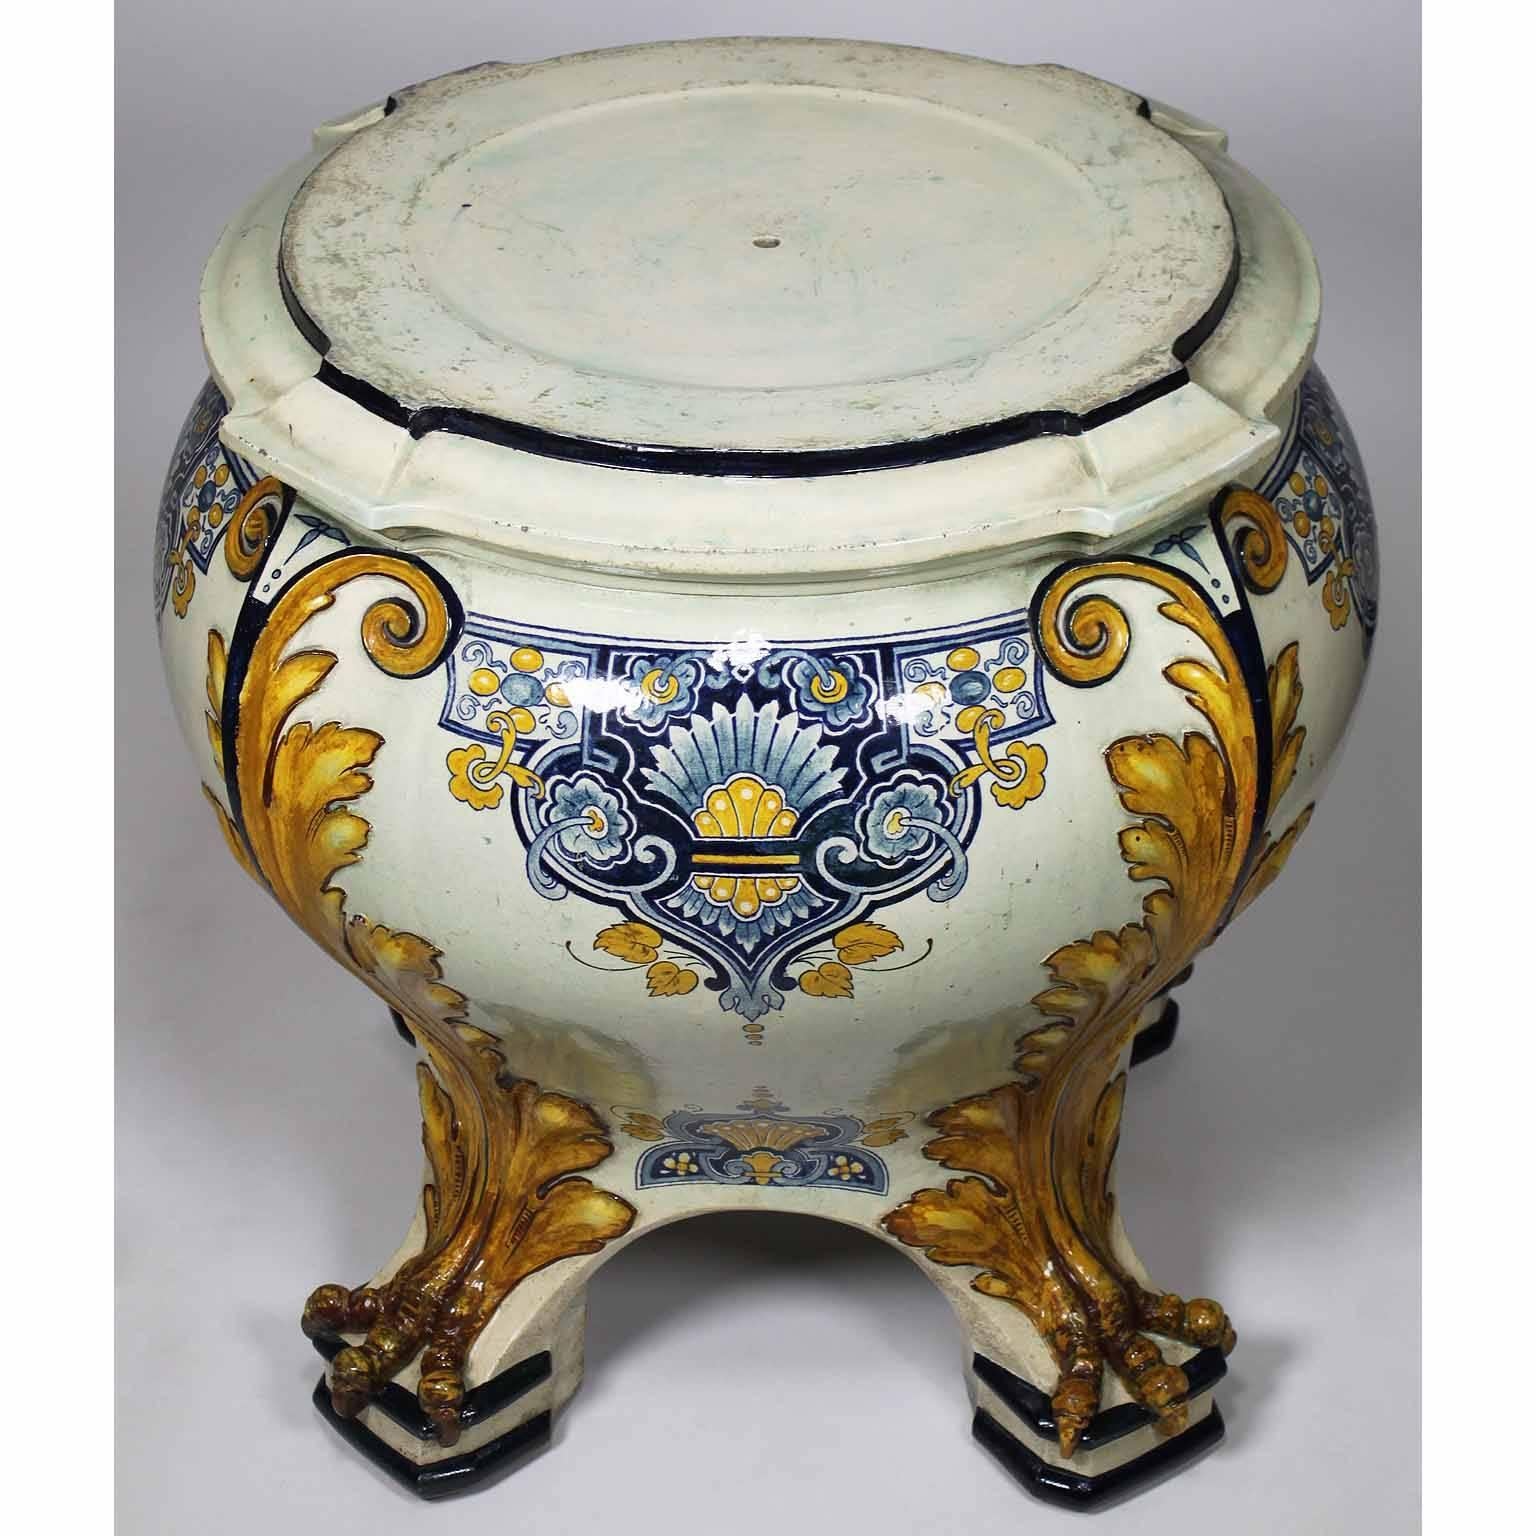 German 19th Century Neoclassical Revival Majolica Jardinière Planter on Stand 6